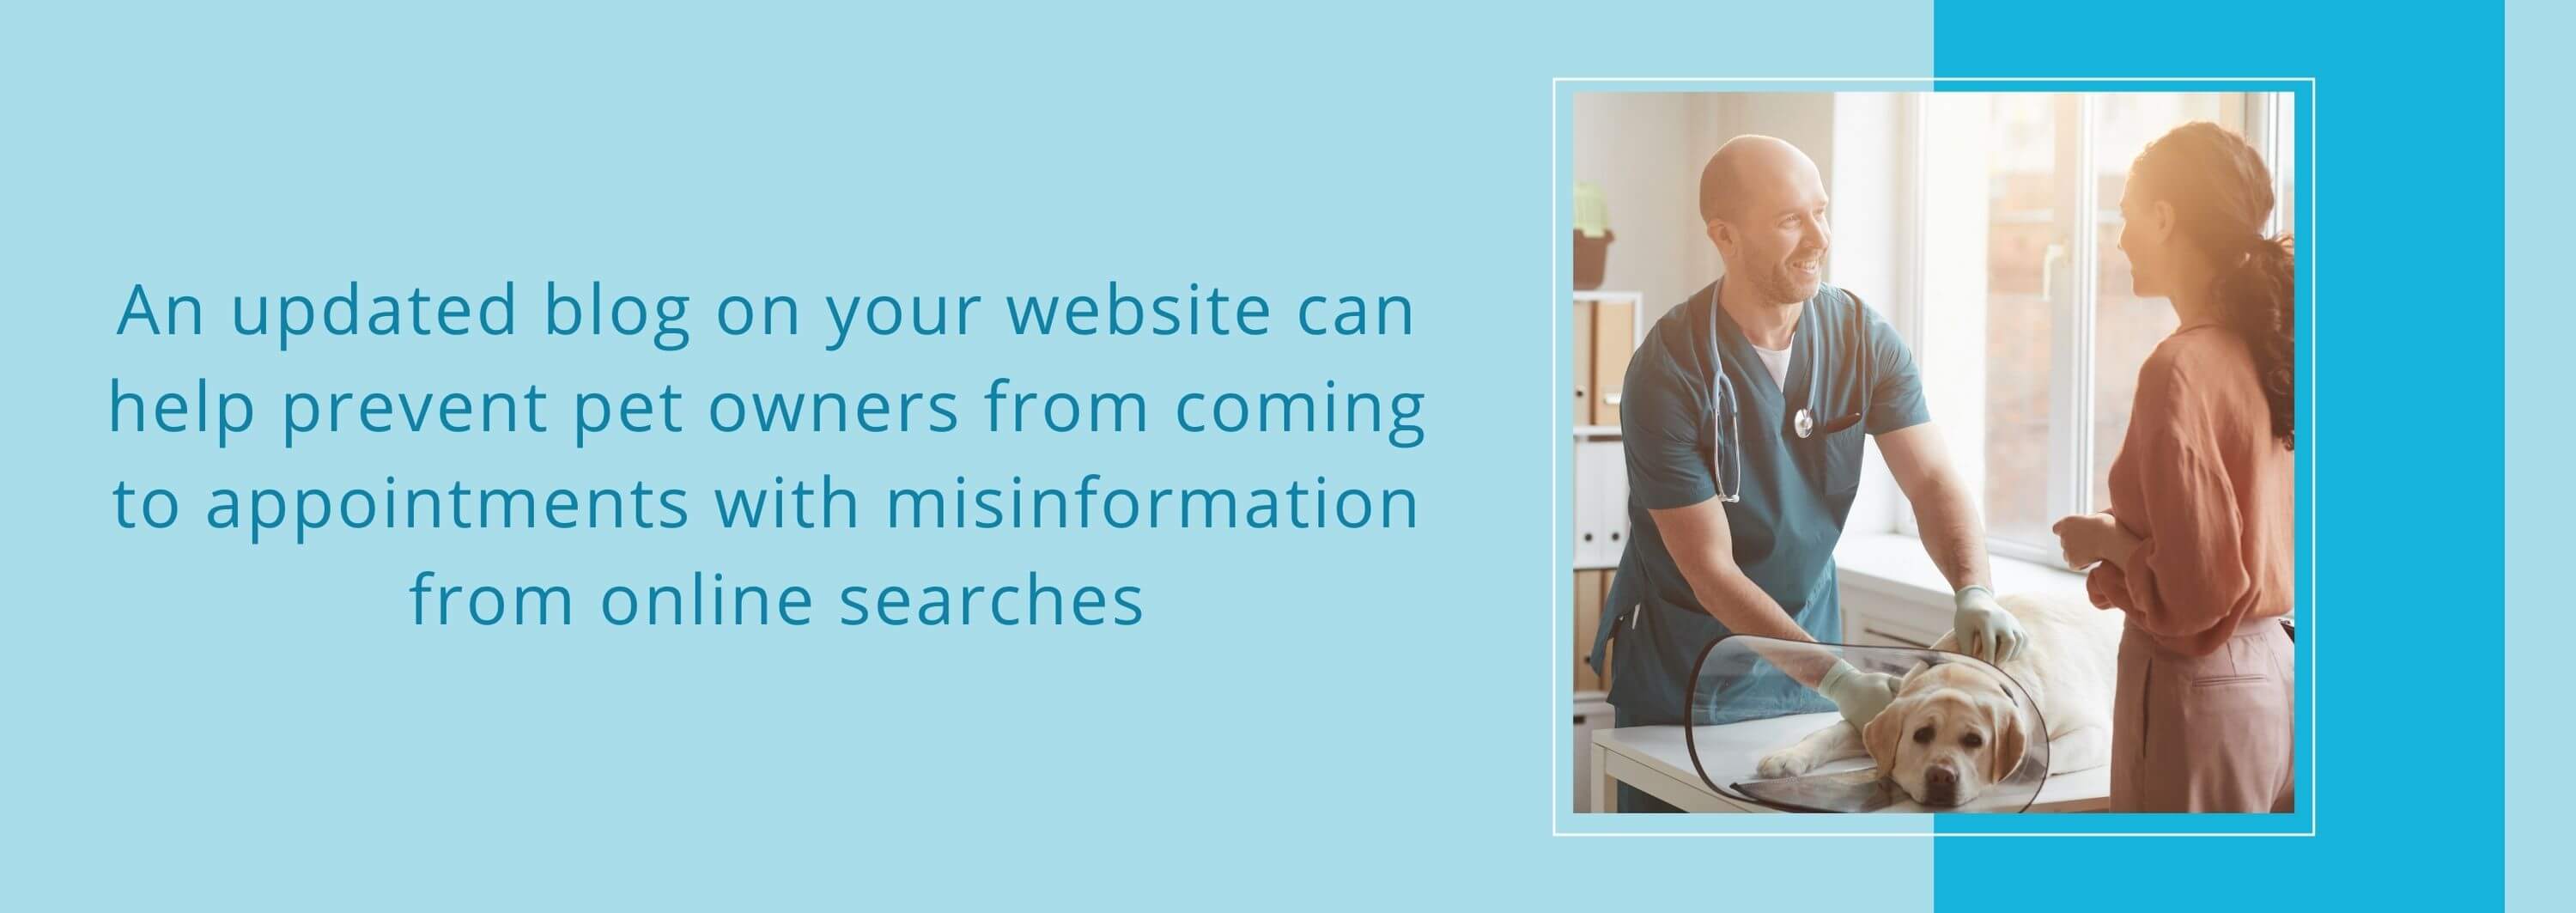 An updated blog on your website can help prevent pet owners from coming to appointments with misinformation from online searches